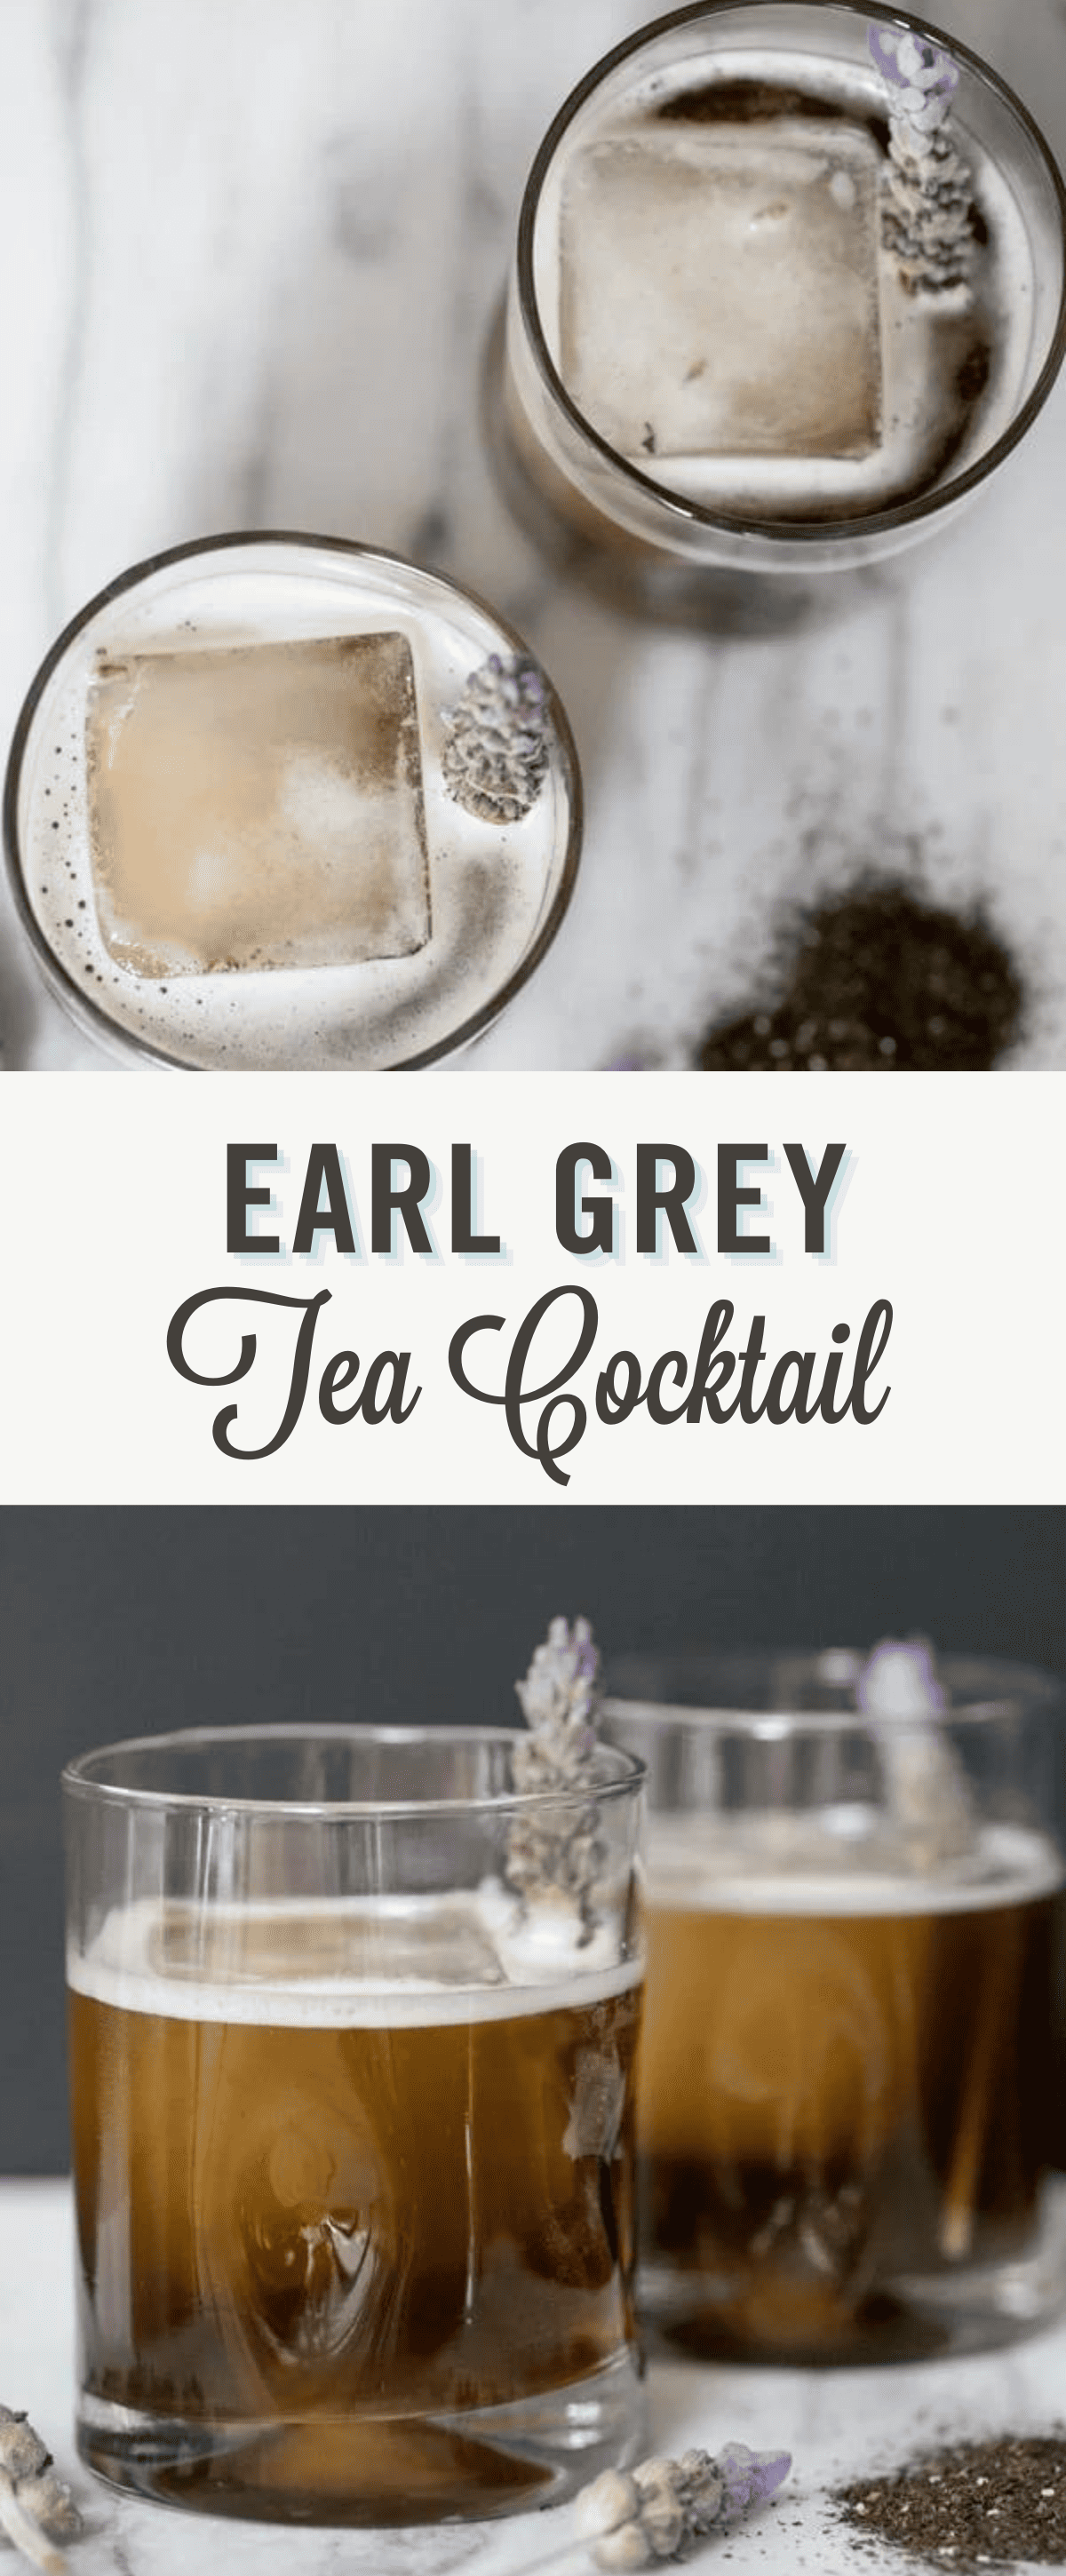 Earl Grey Tea cocktail with title text.